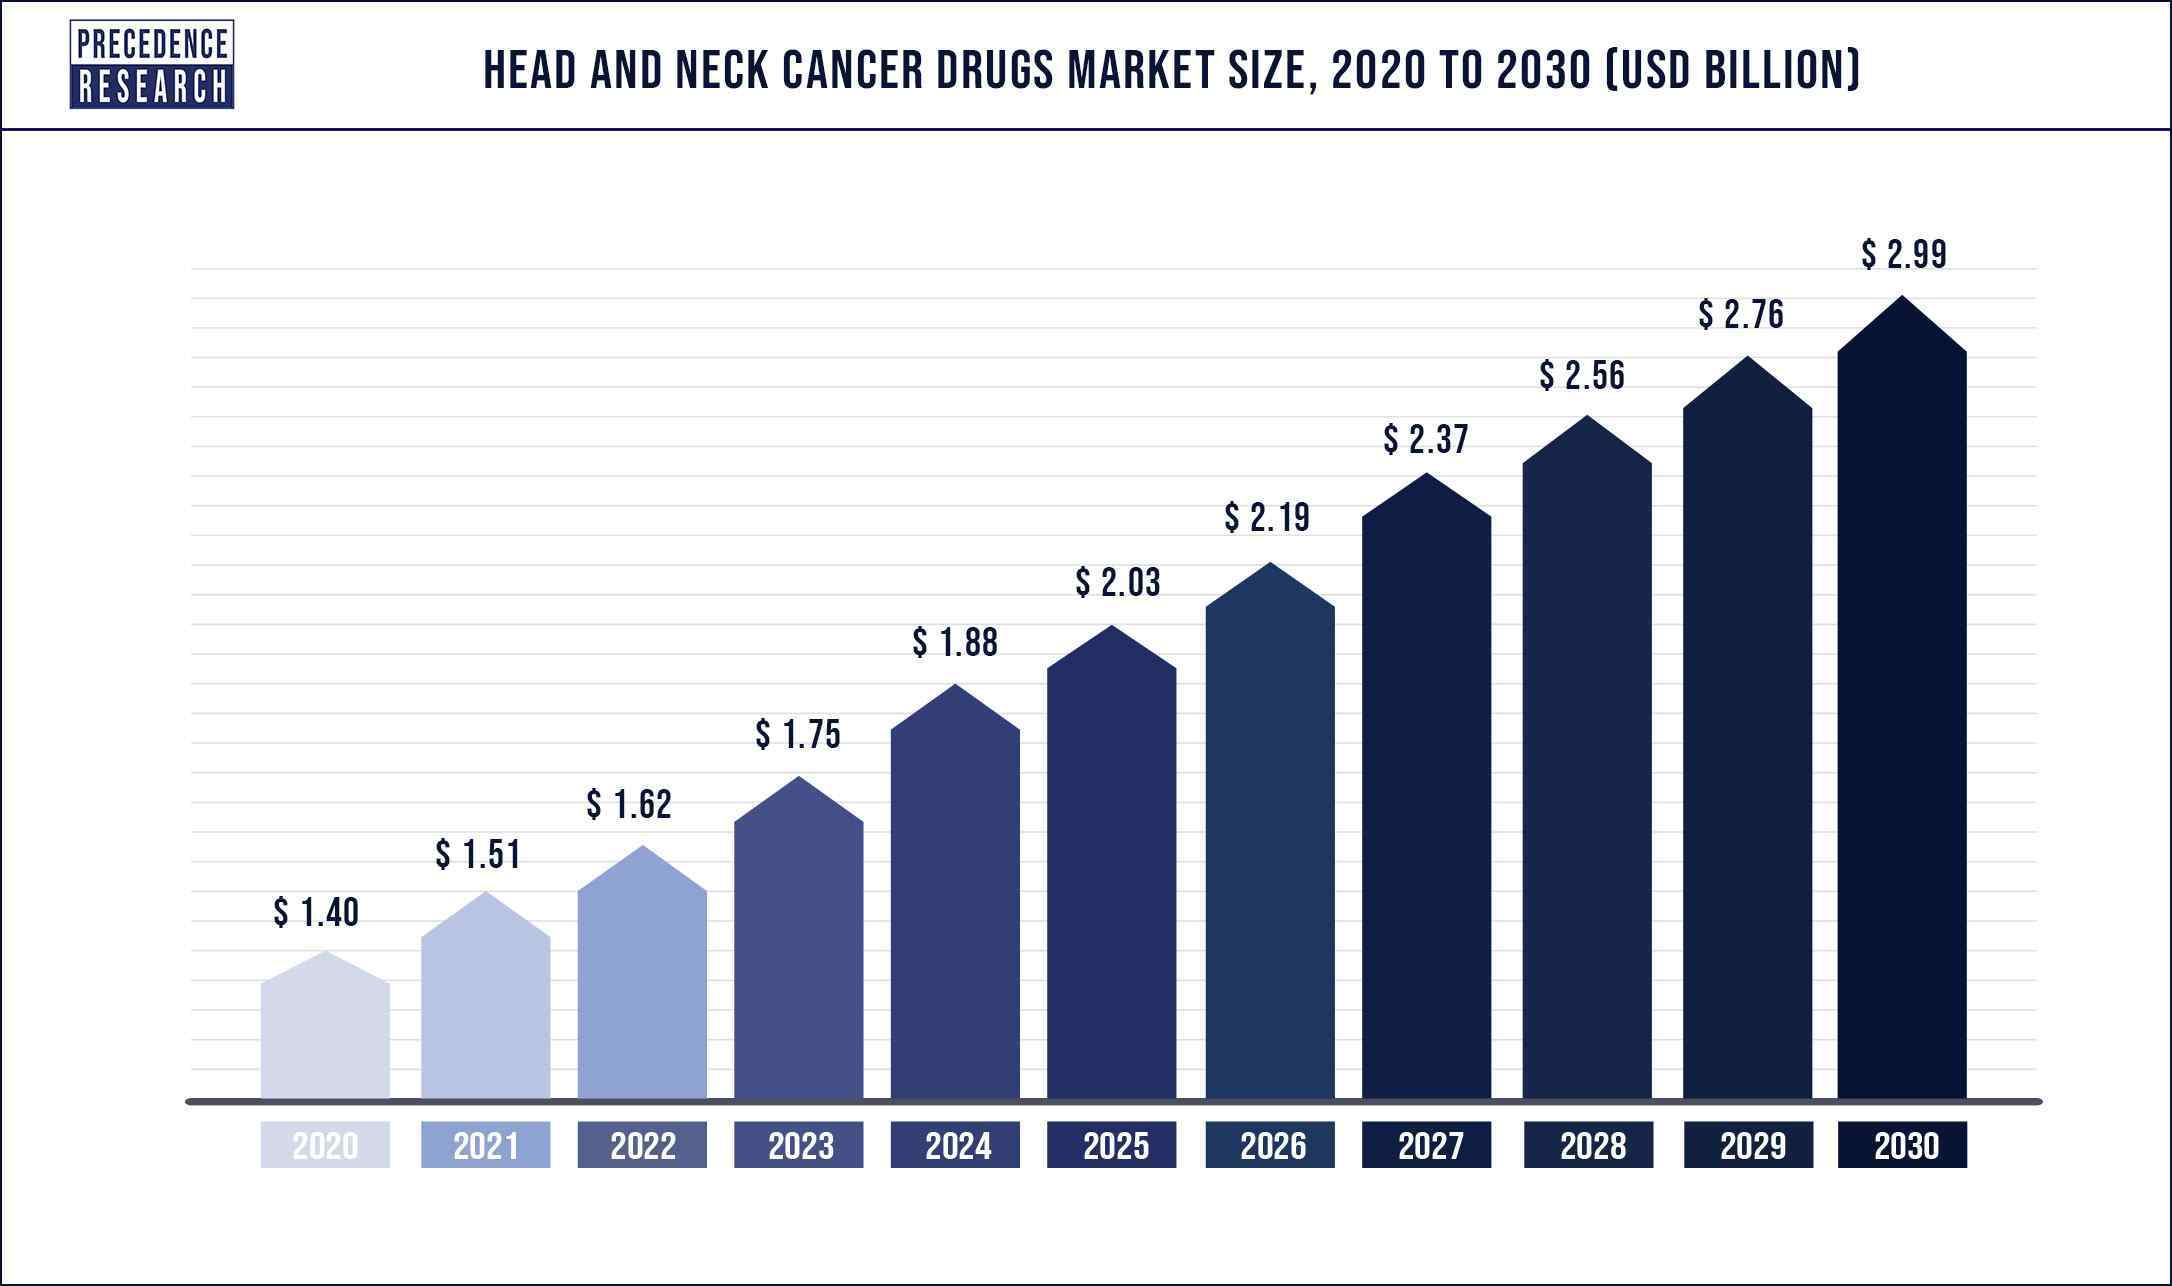 Head and Neck Cancer Drugs Market Size 2020 to 2030